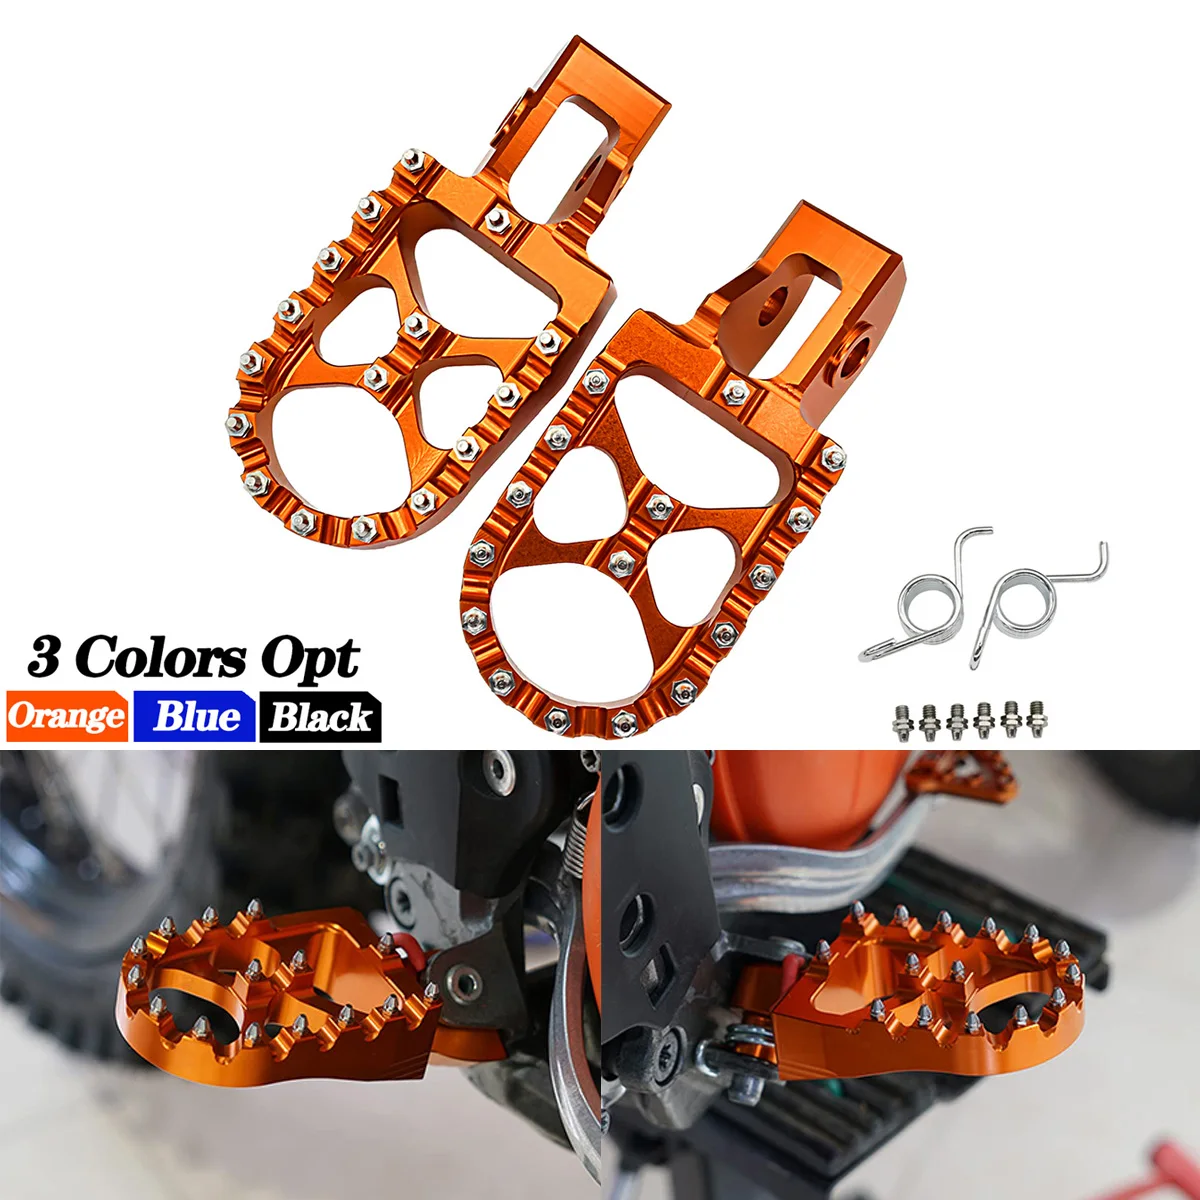 Motorcycle Foot Pegs Foot Rest Footpegs Rests Pedals For Ktm Exc Excf Xc Xcf Sx - £19.92 GBP+